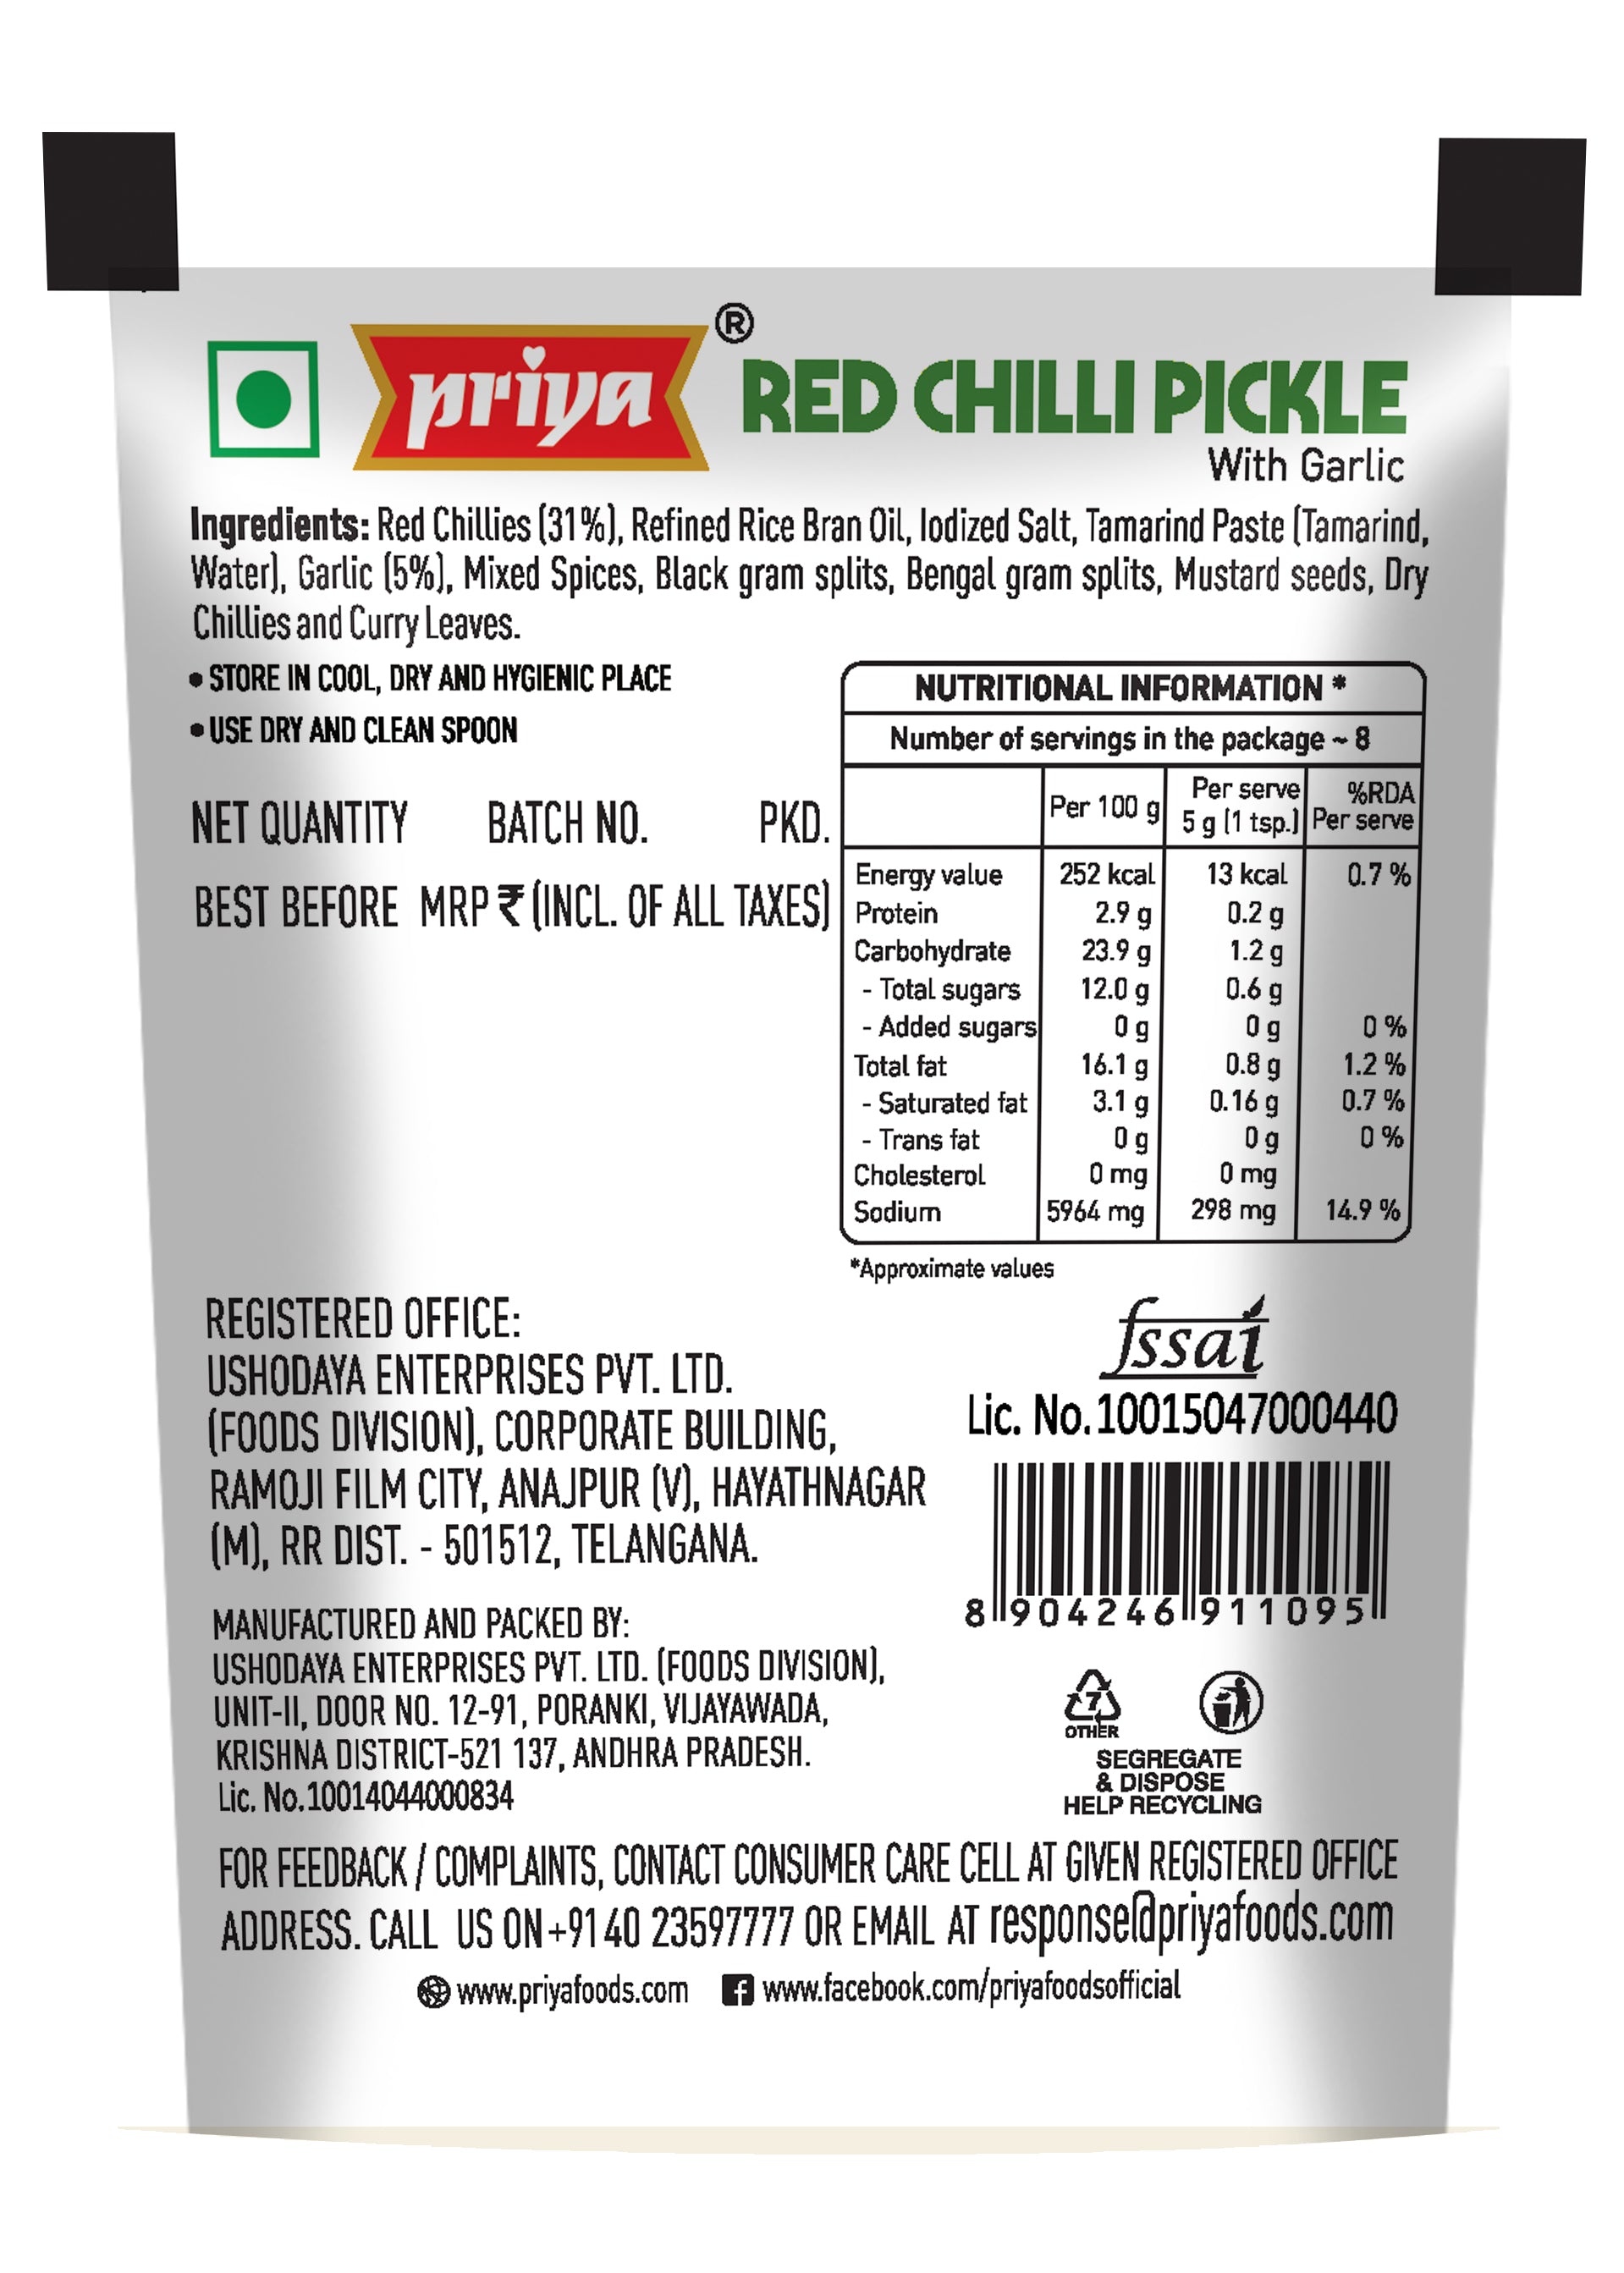 Red Chili Pickle-35g Sachet(Pouch Pack of 10)